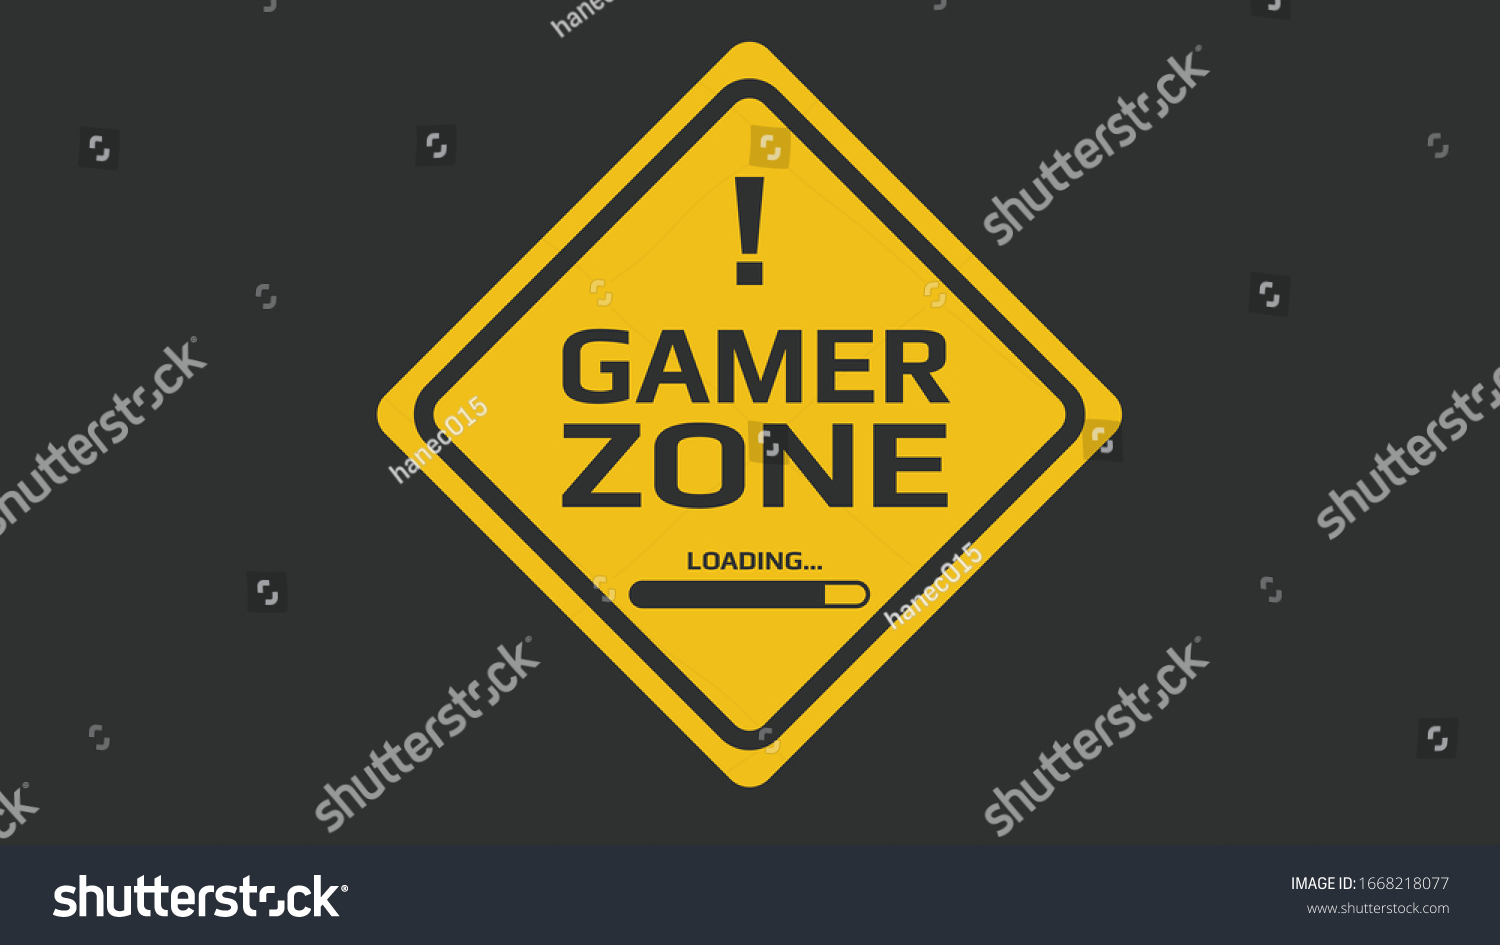 Game Zone Yellow Sign. gamer zone loading. #1668218077